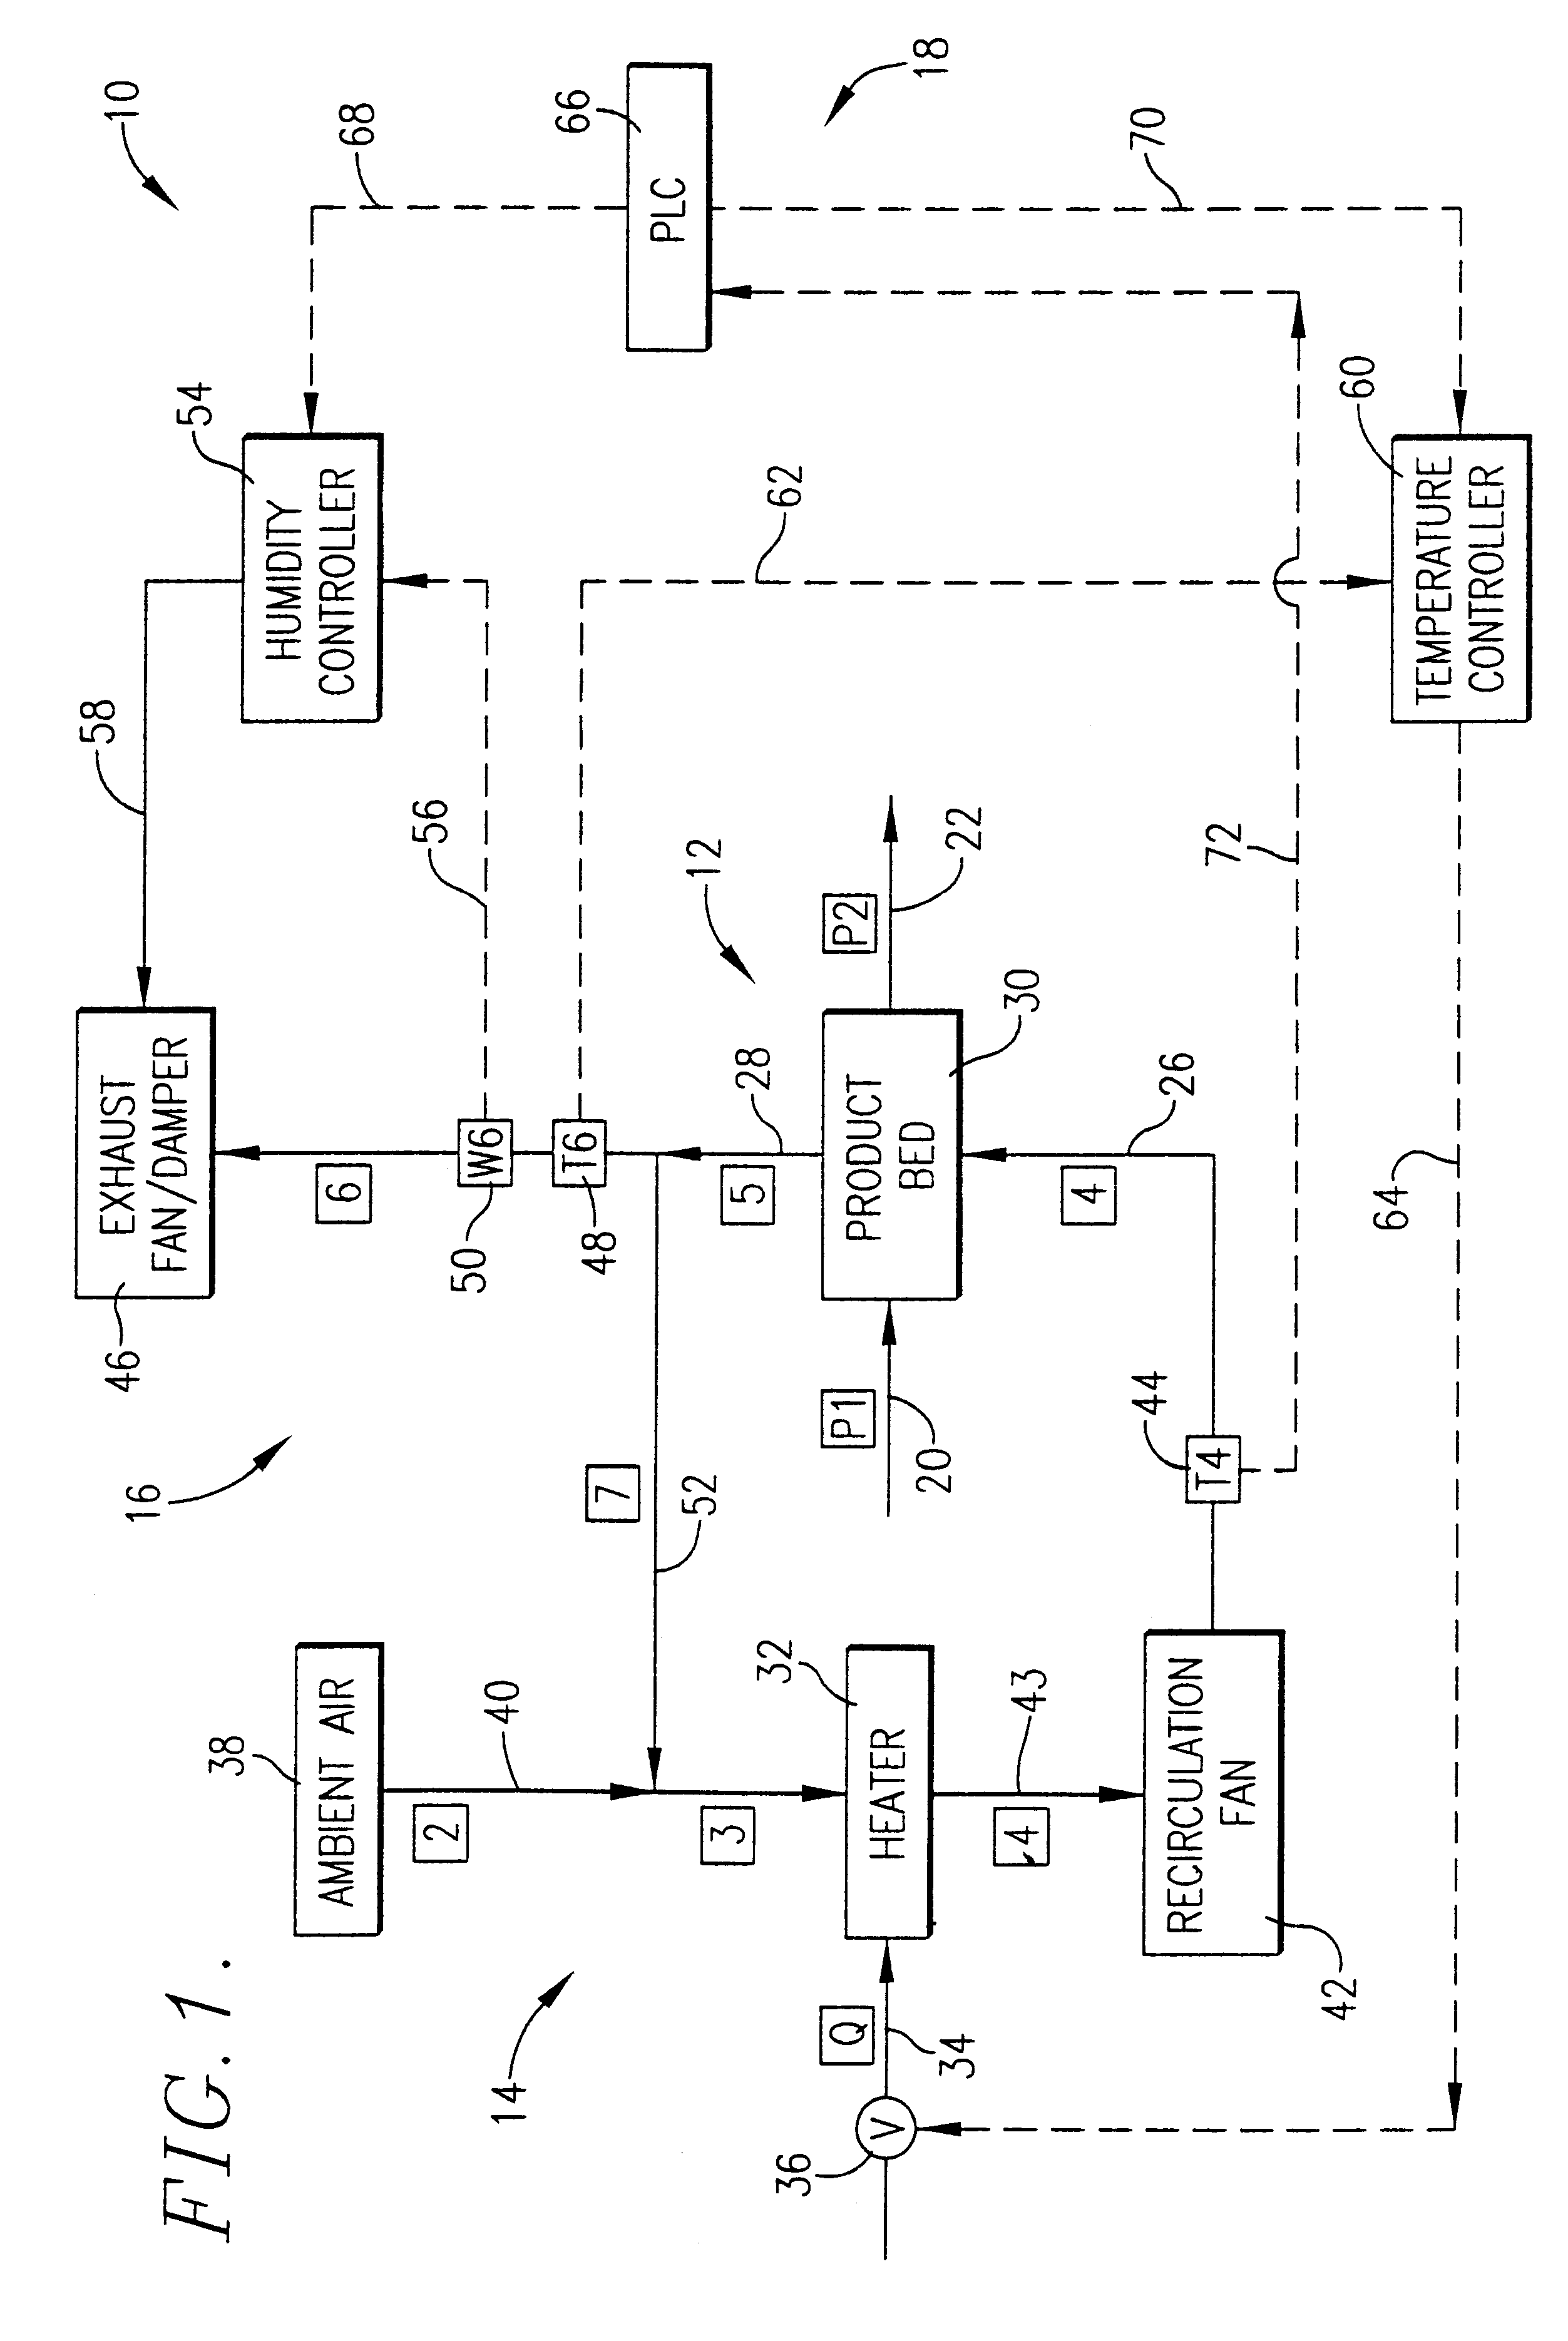 Dryer apparatus and dryer control system